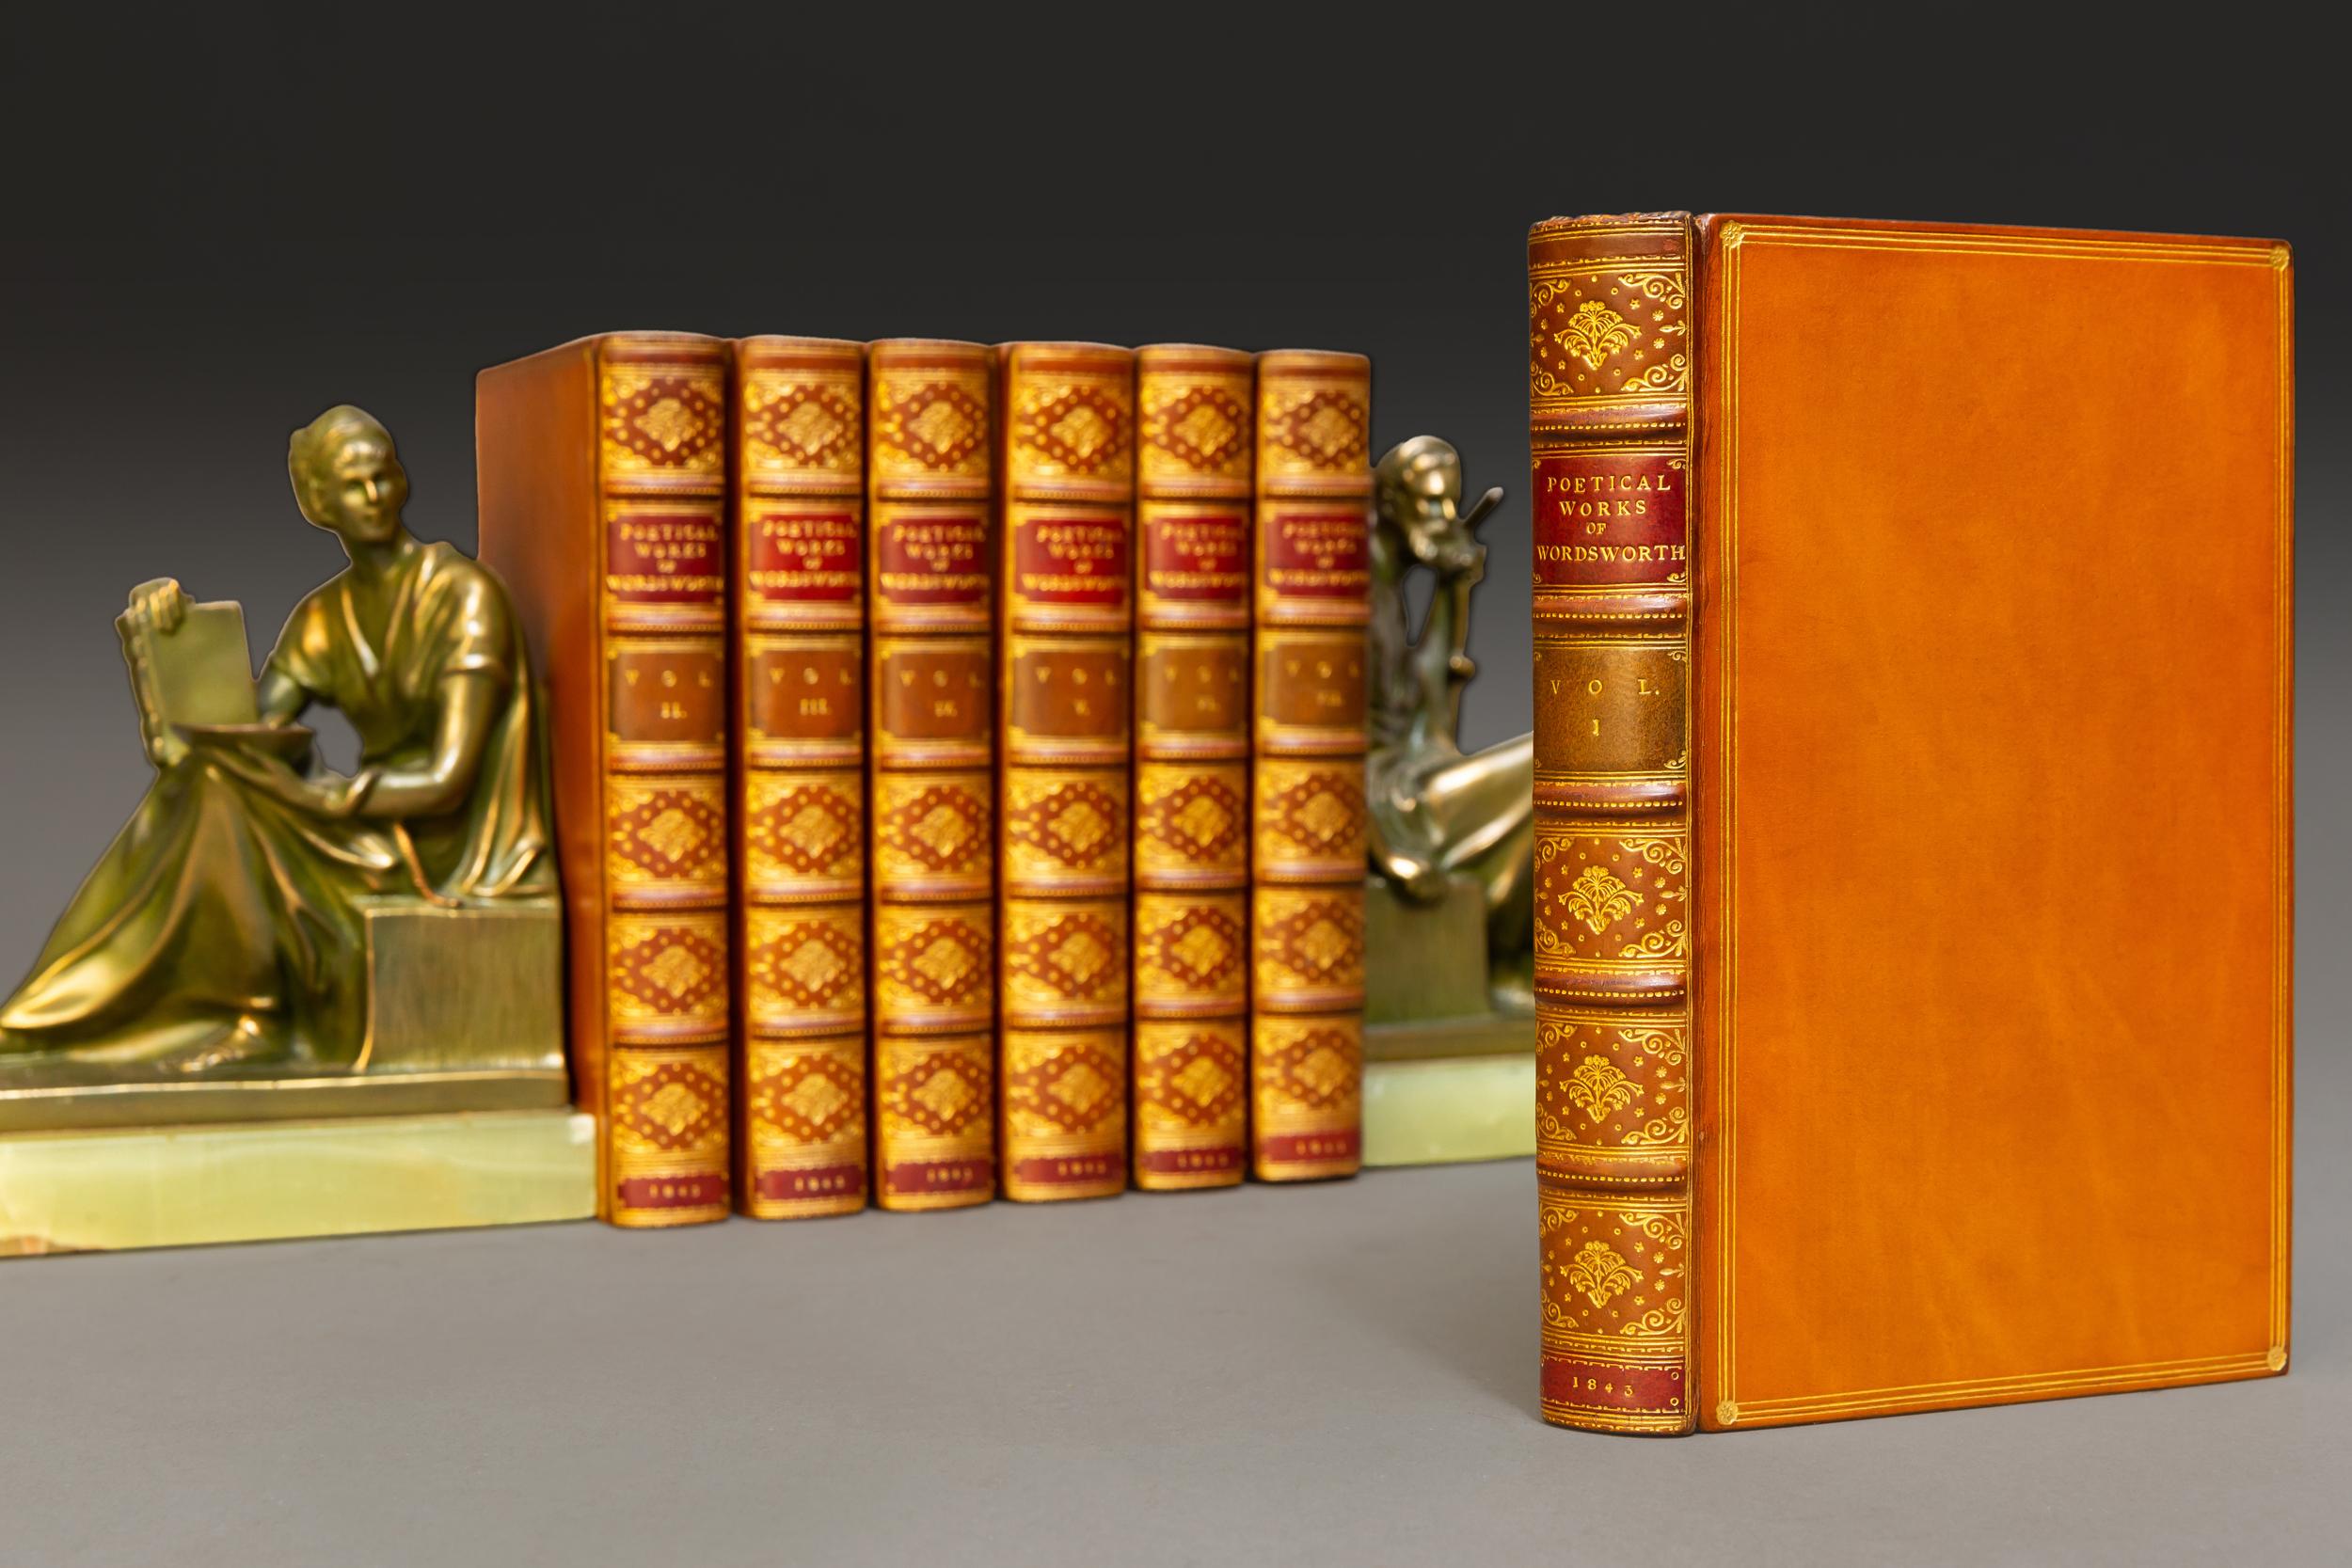 7 Volumes. William Wordsworth. The Poetical Works. Portrait frontispiece. Bound in full tan calf by Morrell. Top edges gilt, raised bands, gilt on spines & covers, green and red labels. 
Published: London: Edward Moxon, 1843.